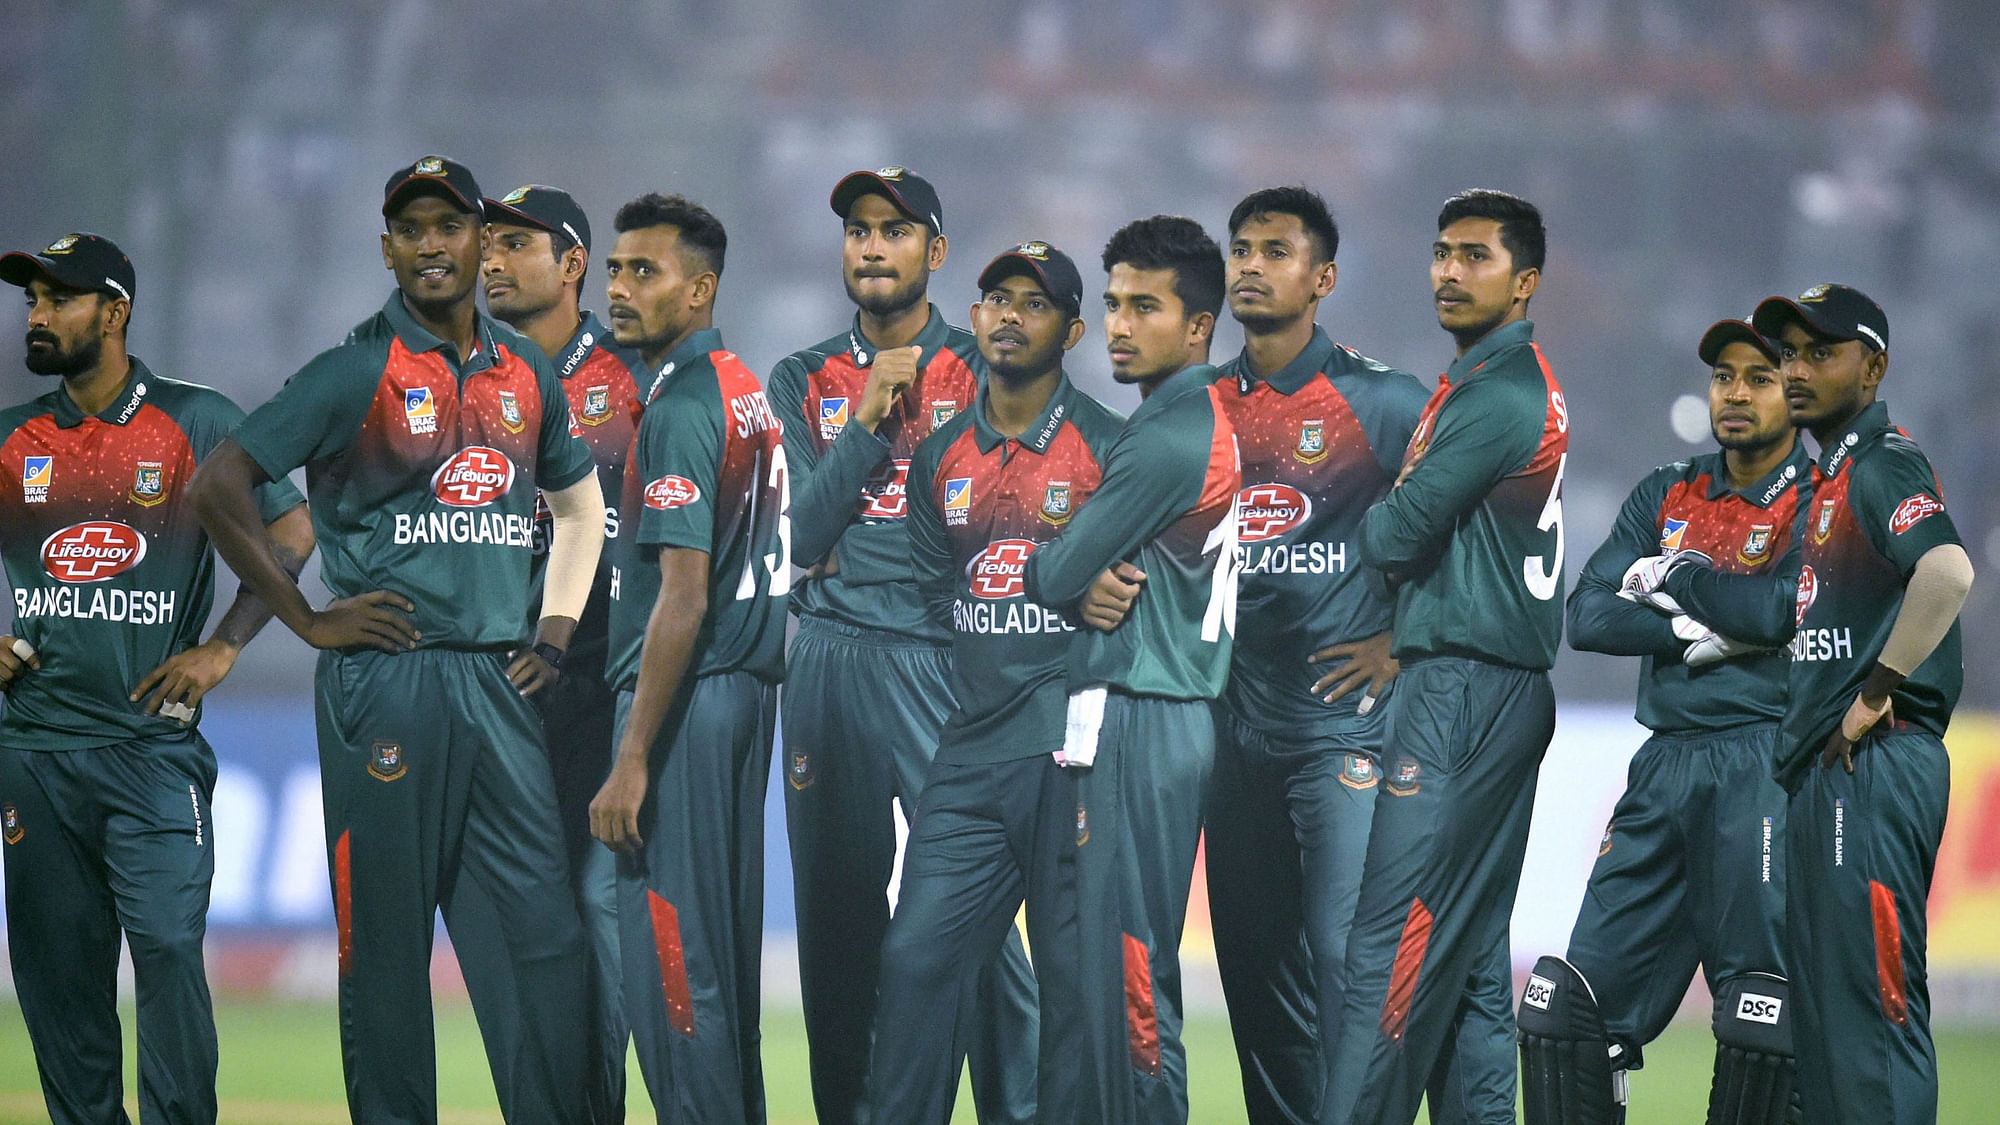 A cycle threat looms over the second T20I between India and Bangladesh in Rajkot.